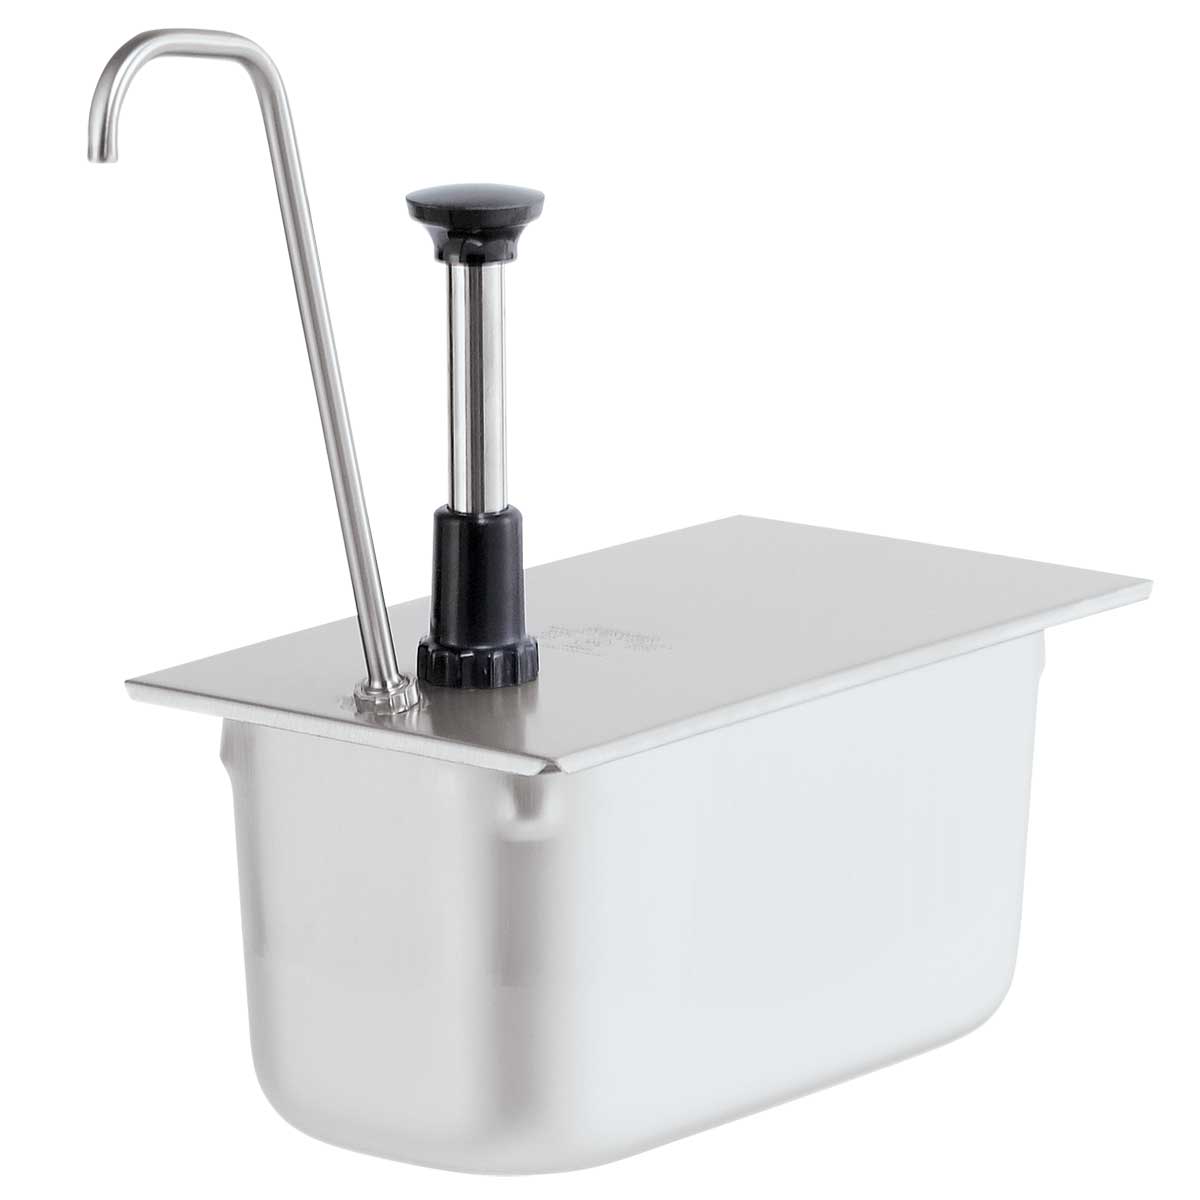 Server Stainless Steel Condiment Dispenser Pump and Lid - 16L x